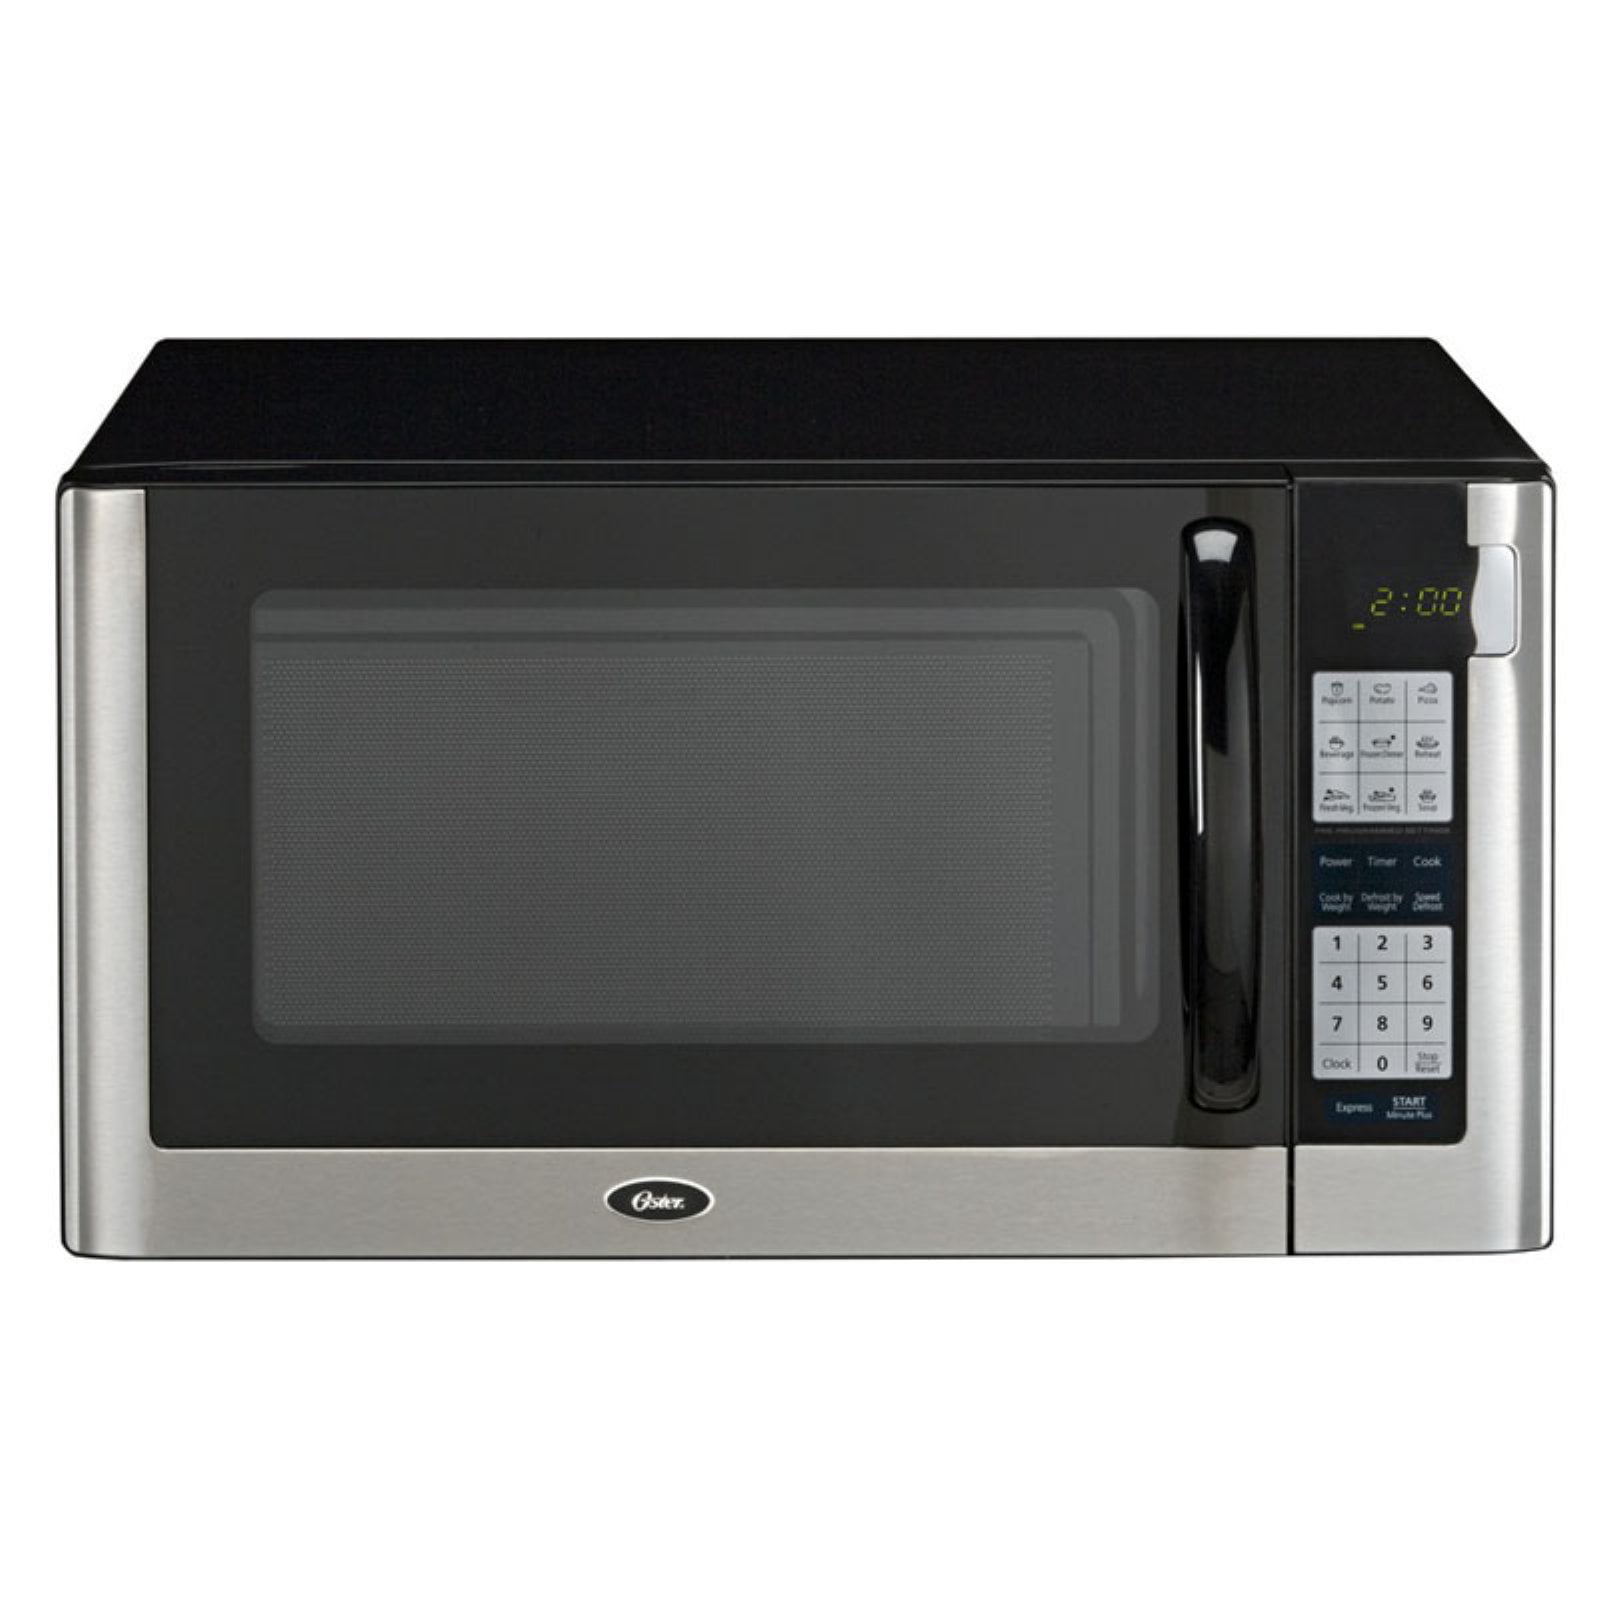 Oster 22'' 1.6 cu.ft. Countertop Microwave 